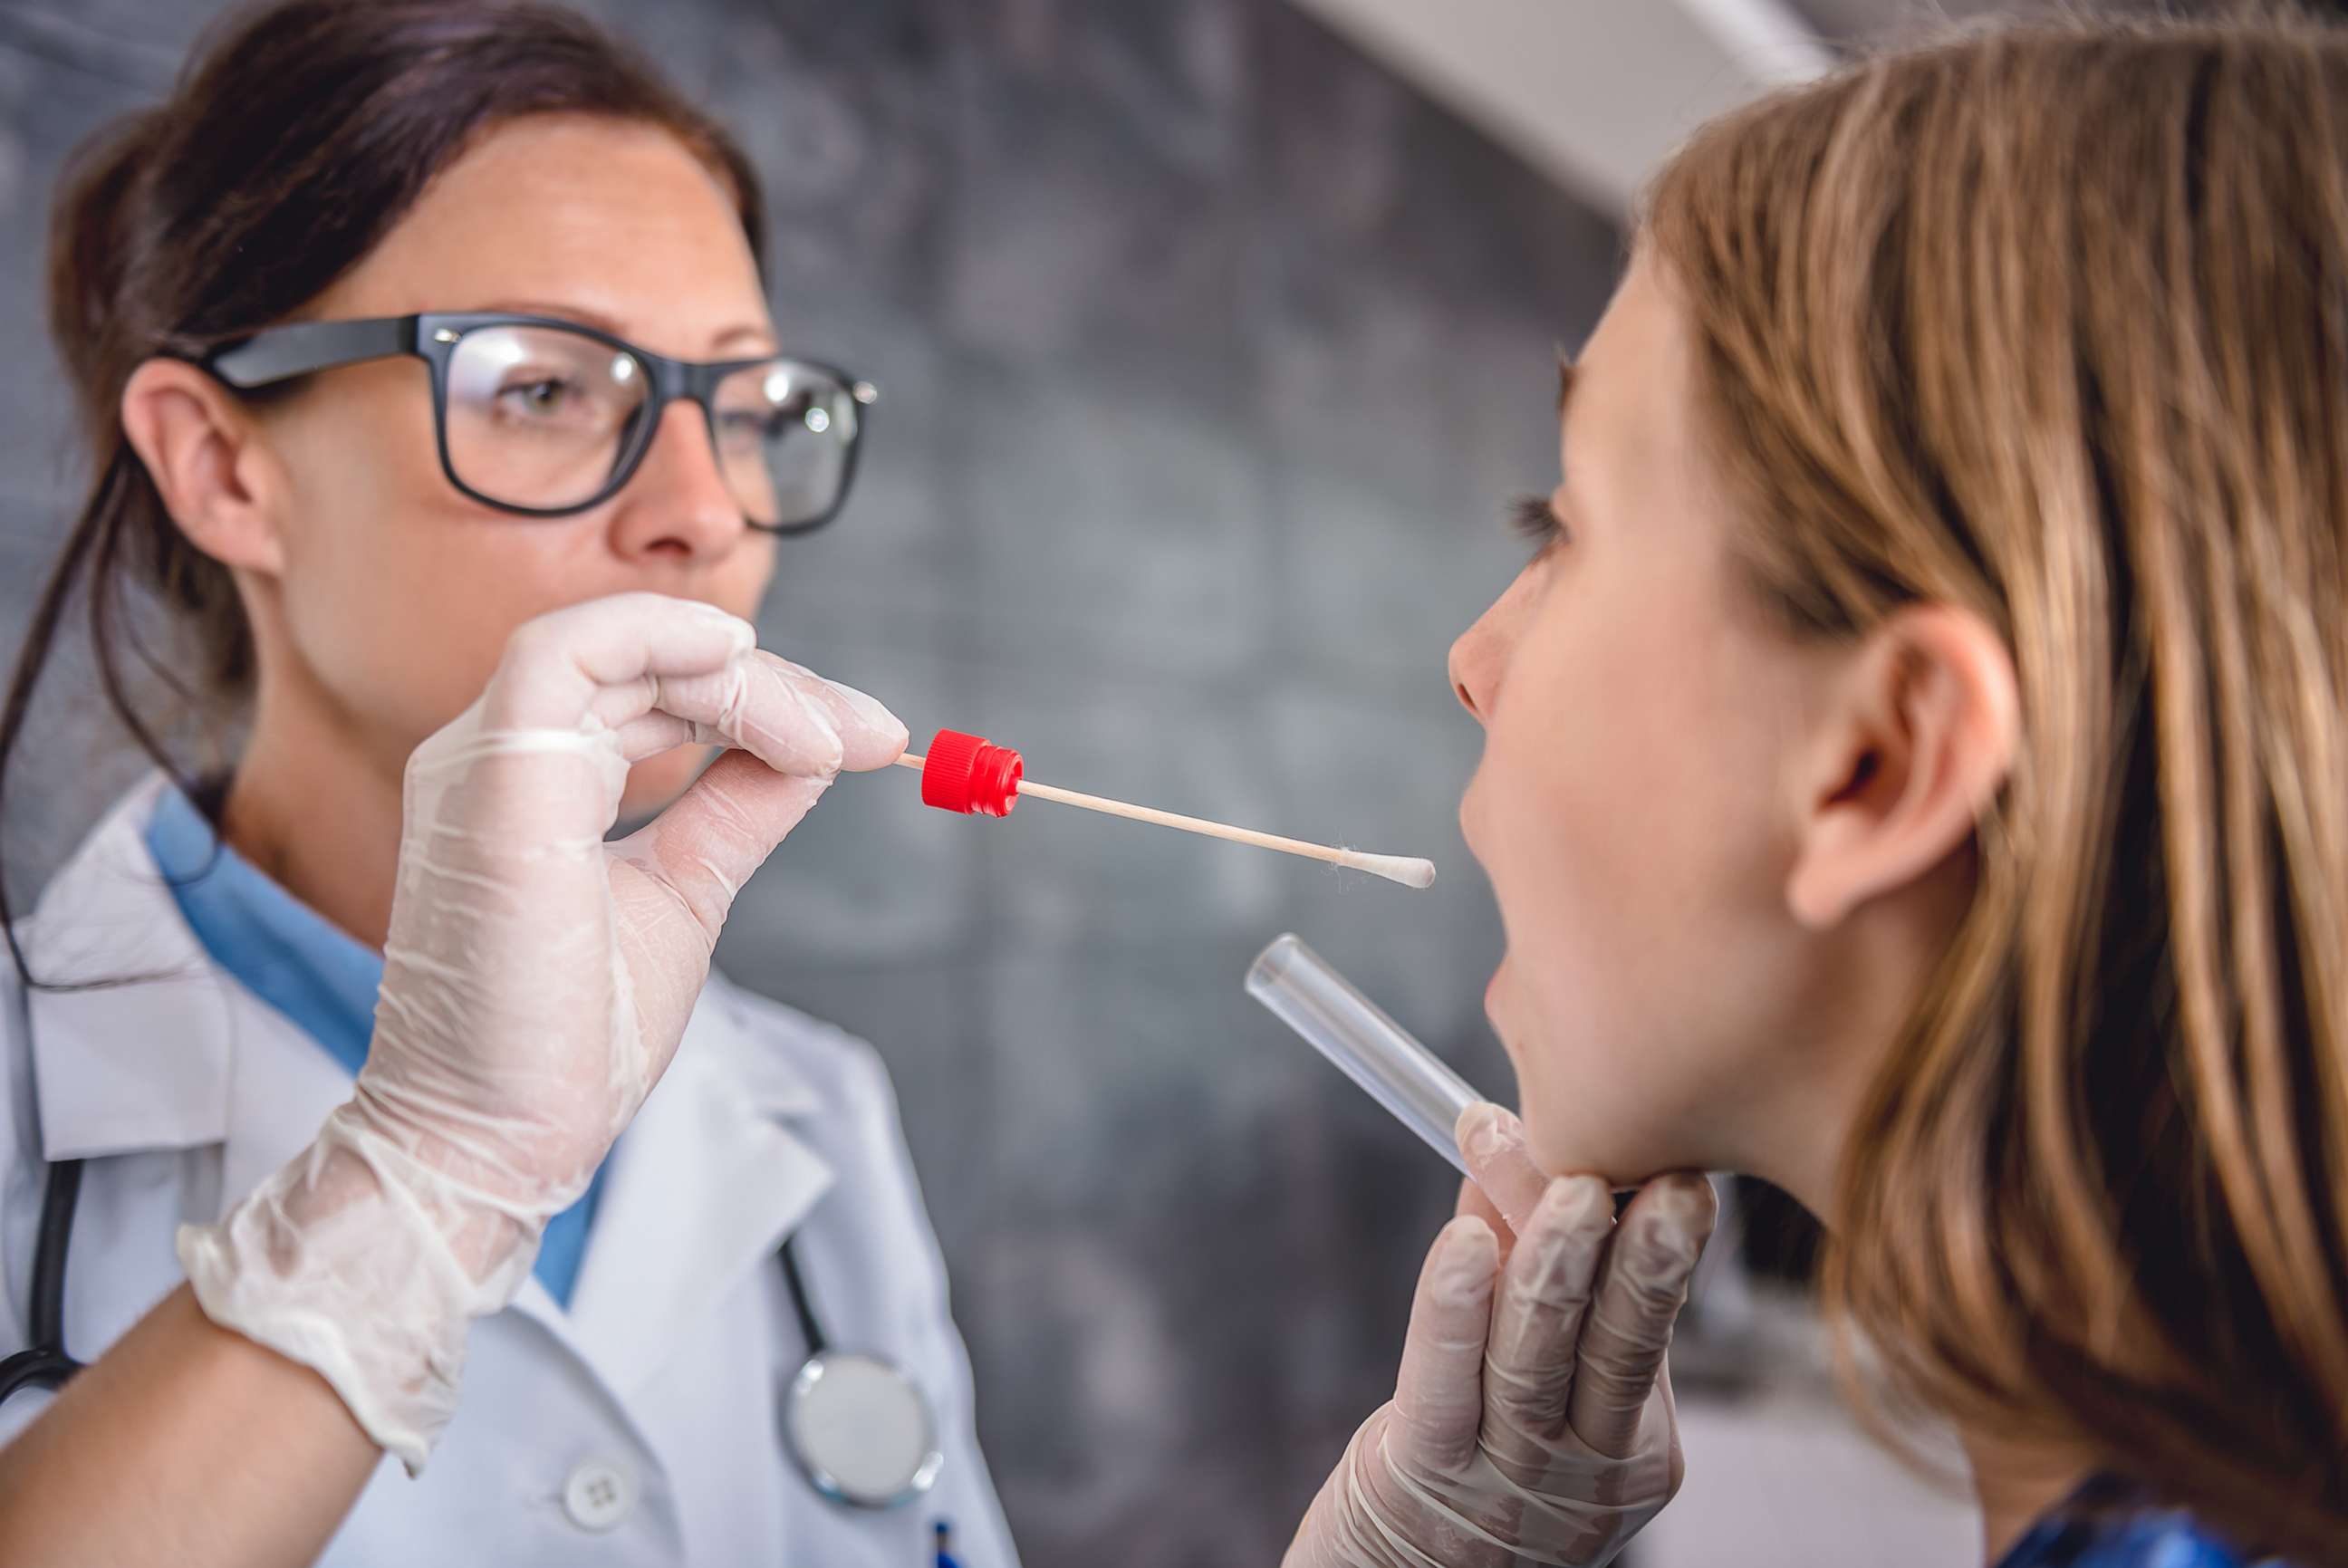 PHOTO: Female pediatrician using a swab to take a sample from a patient's throat